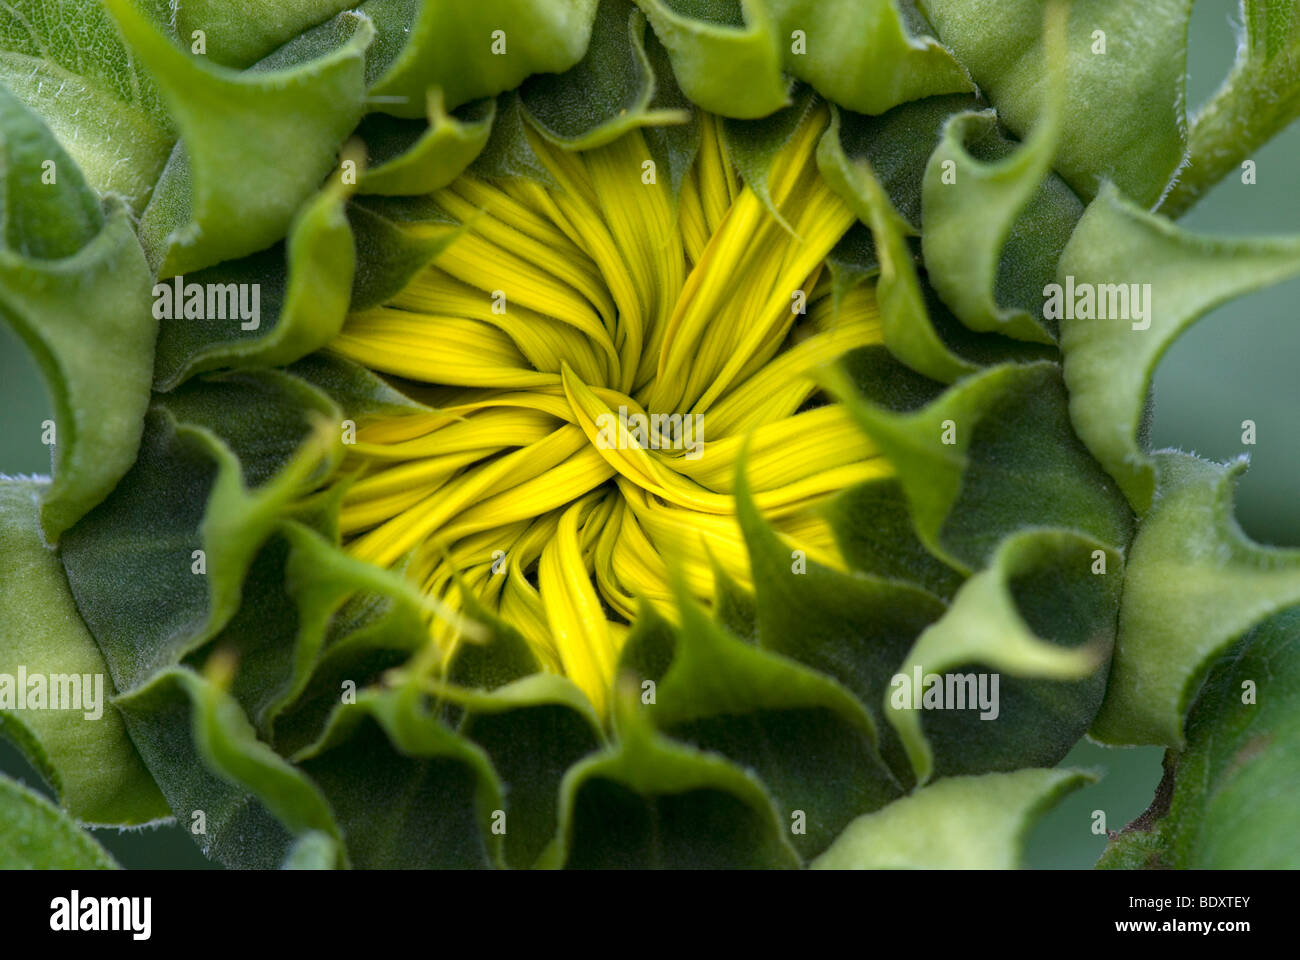 Whorl of petals before openning sunflower Stock Photo